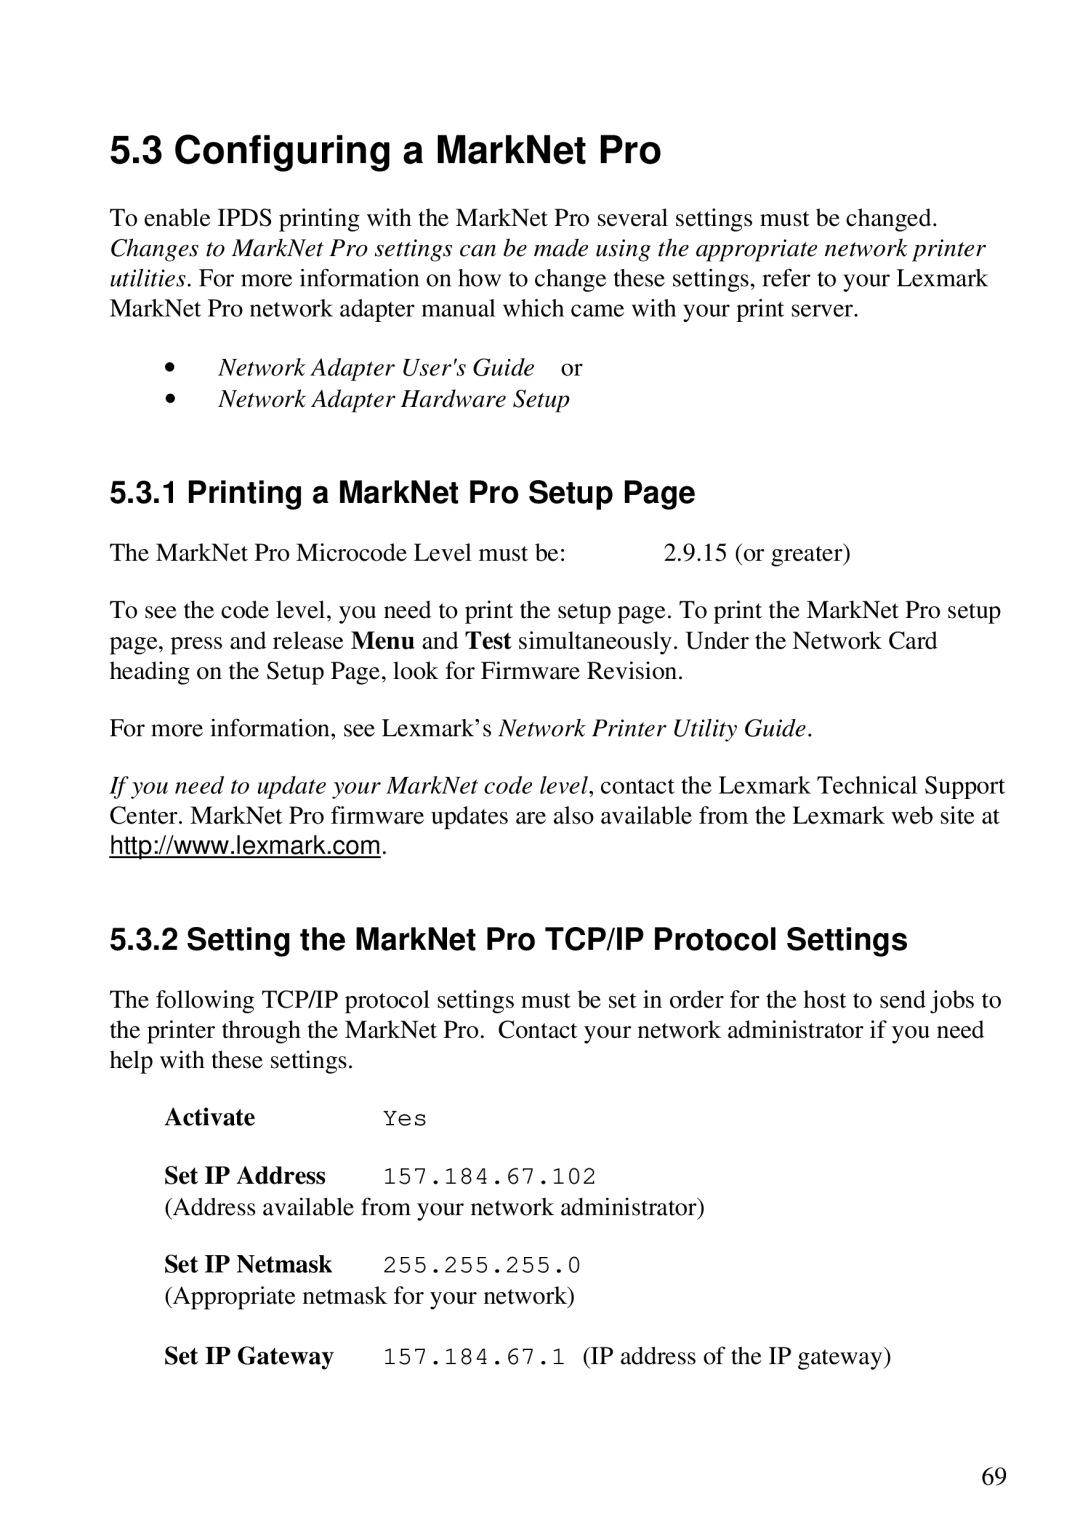 Lexmark Se 3455 Configuring a MarkNet Pro, Printing a MarkNet Pro Setup, Setting the MarkNet Pro TCP/IP Protocol Settings 